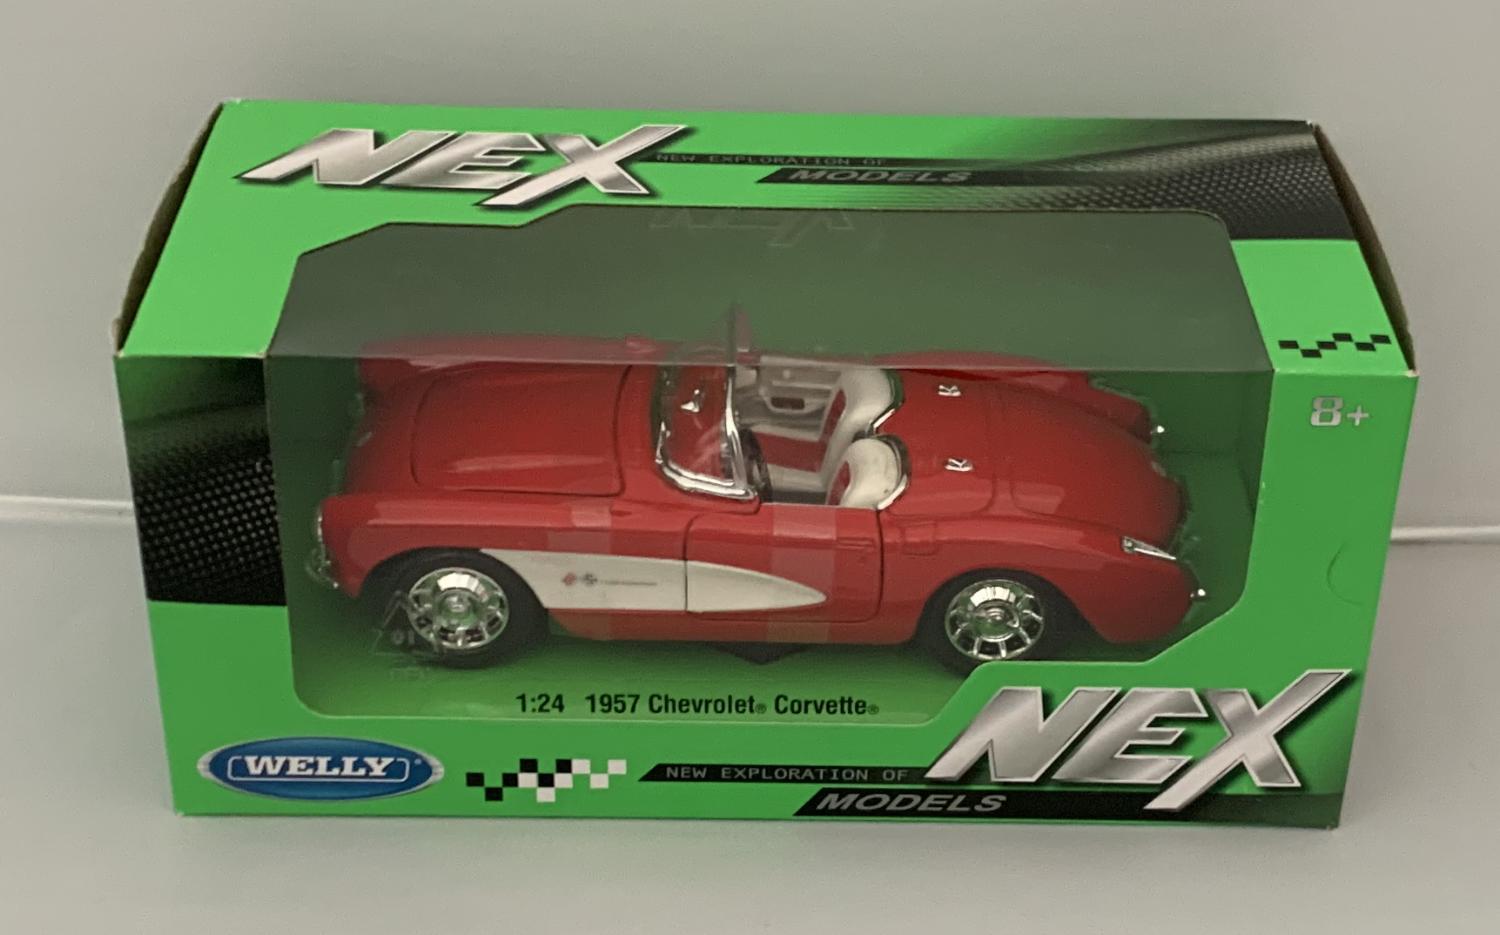 Chevrolet Corvette Convertible, Model is mounted on a removable plinth and presented in a window display box.  The car is approx. 18 cm long and the presentation box is 24 cm long